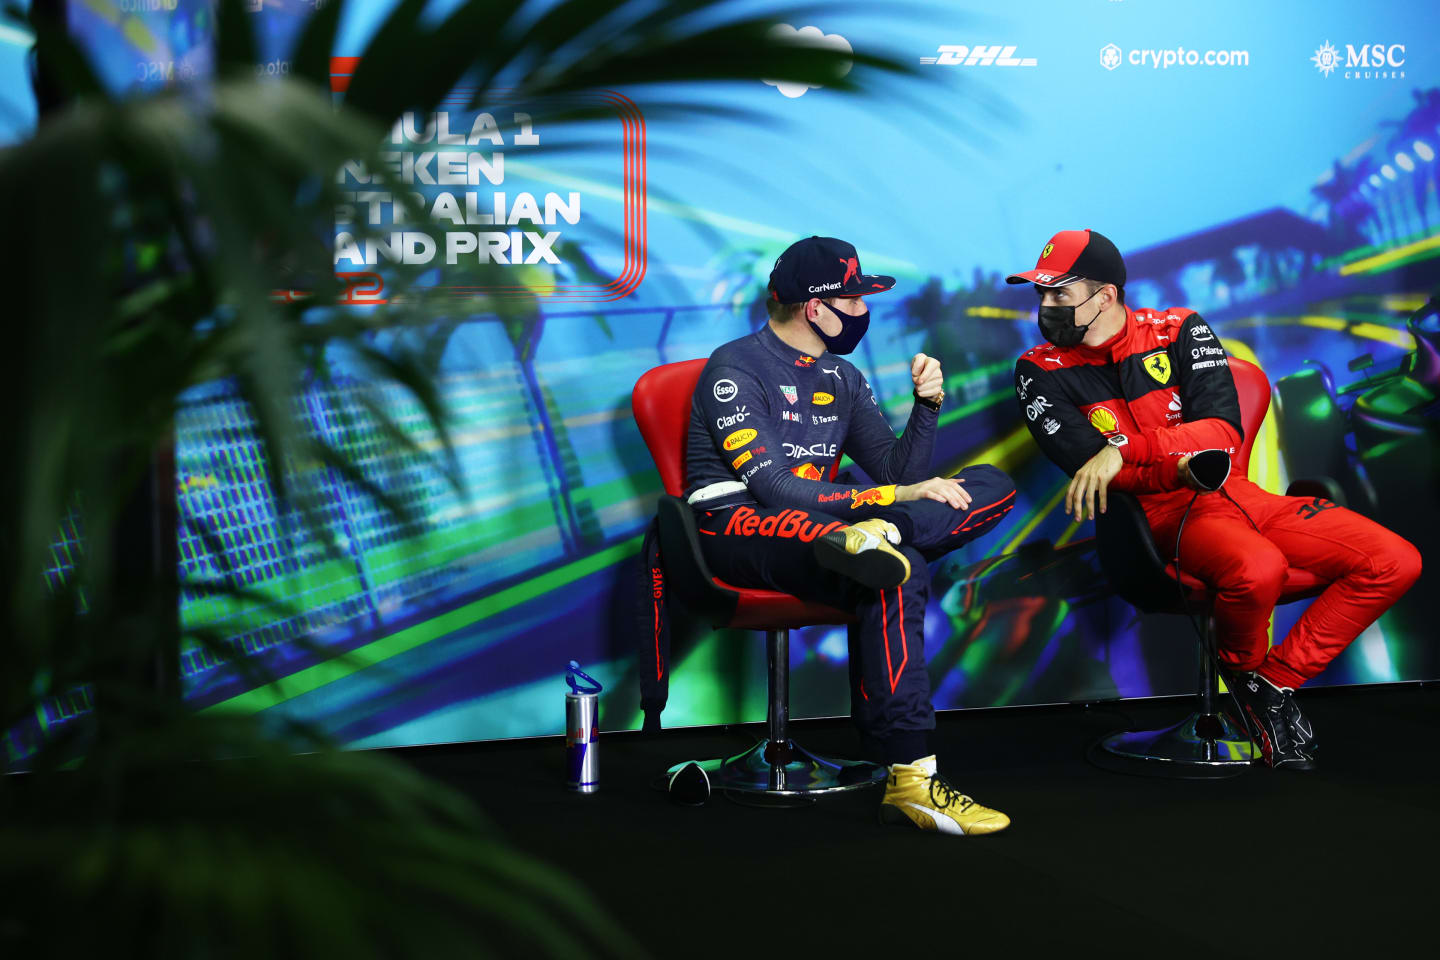 MELBOURNE, AUSTRALIA - APRIL 09: Pole position qualifier Charles Leclerc of Monaco and Ferrari and Second placed qualifier Max Verstappen of the Netherlands and Oracle Red Bull Racing talk in the press conference after qualifying ahead of the F1 Grand Prix of Australia at Melbourne Grand Prix Circuit on April 09, 2022 in Melbourne, Australia. (Photo by Dan Istitene - Formula 1/Formula 1 via Getty Images)